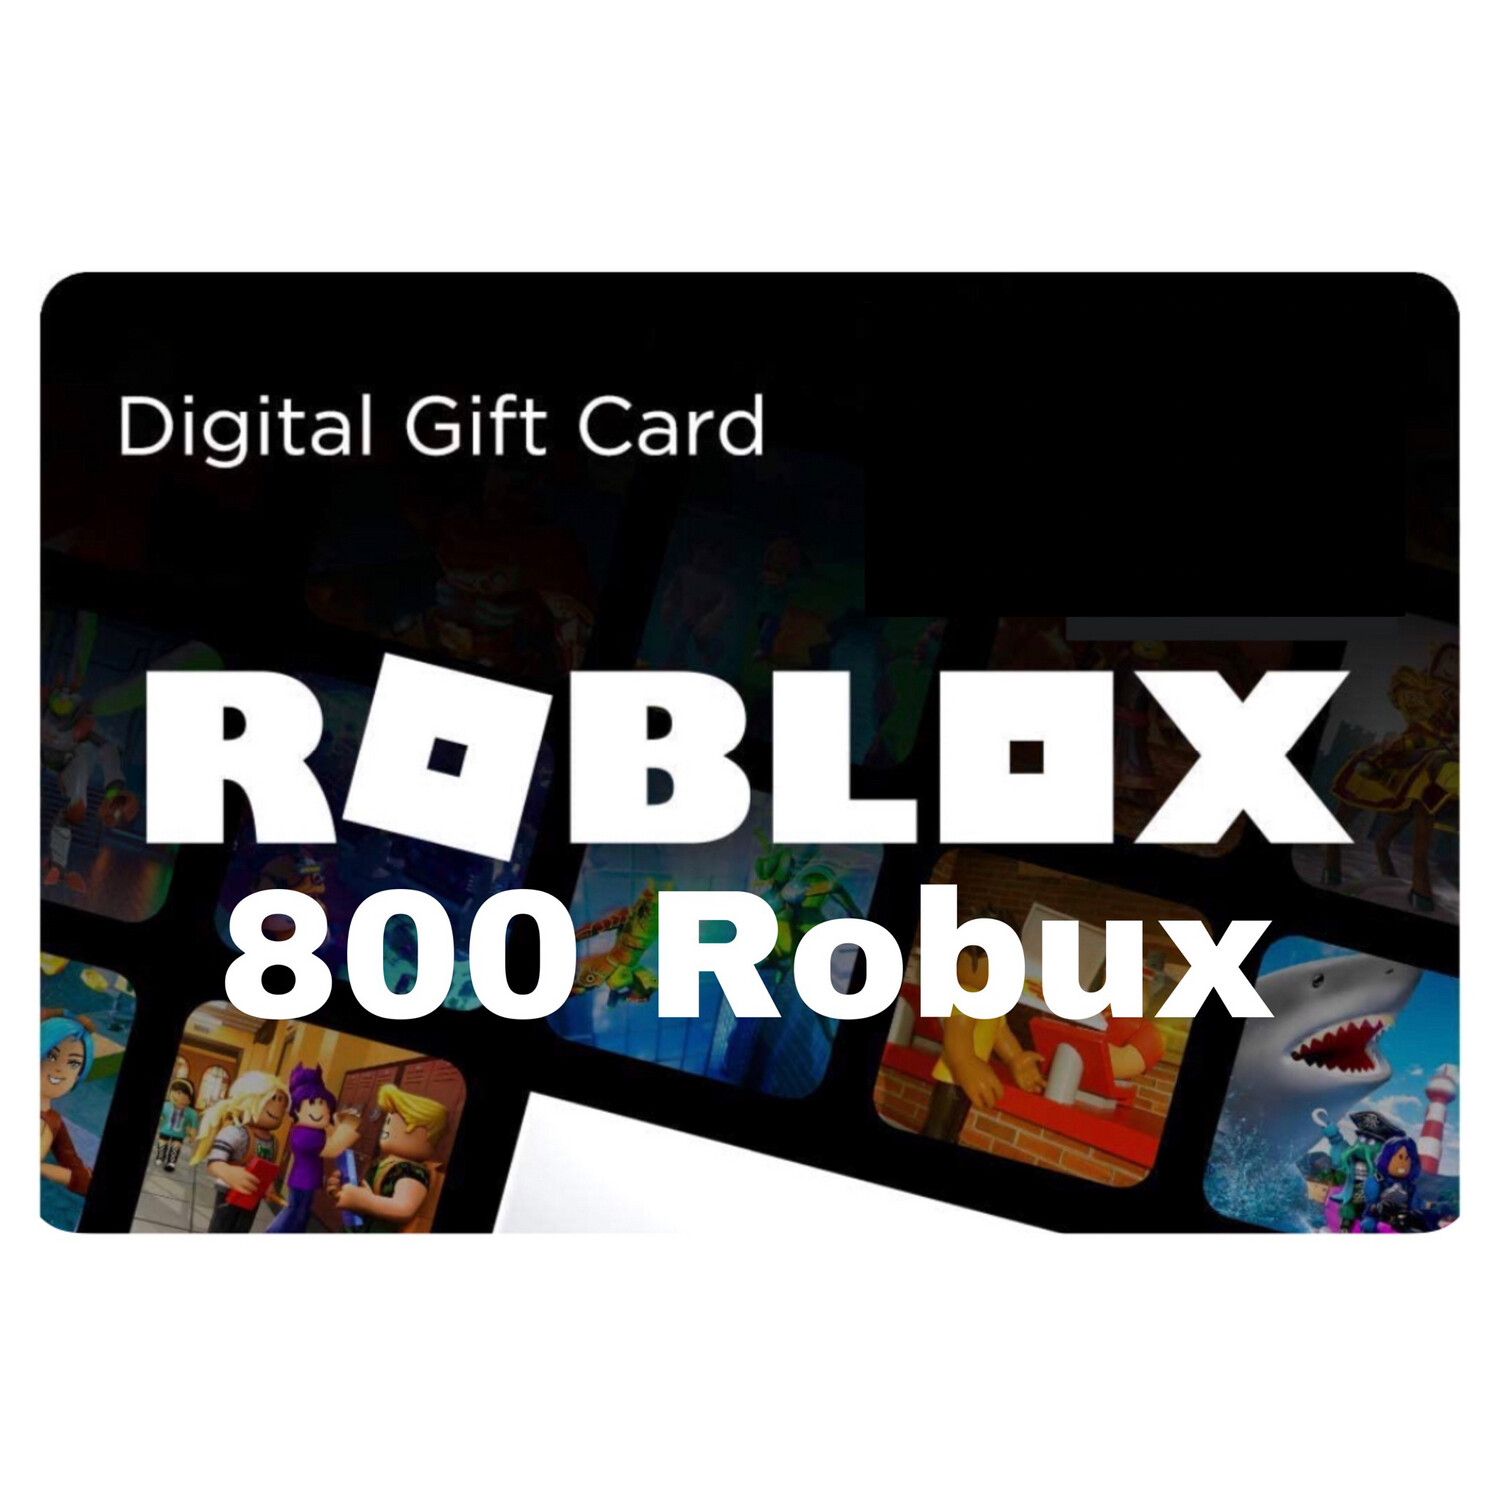 Roblox 800 Robux Gift Card